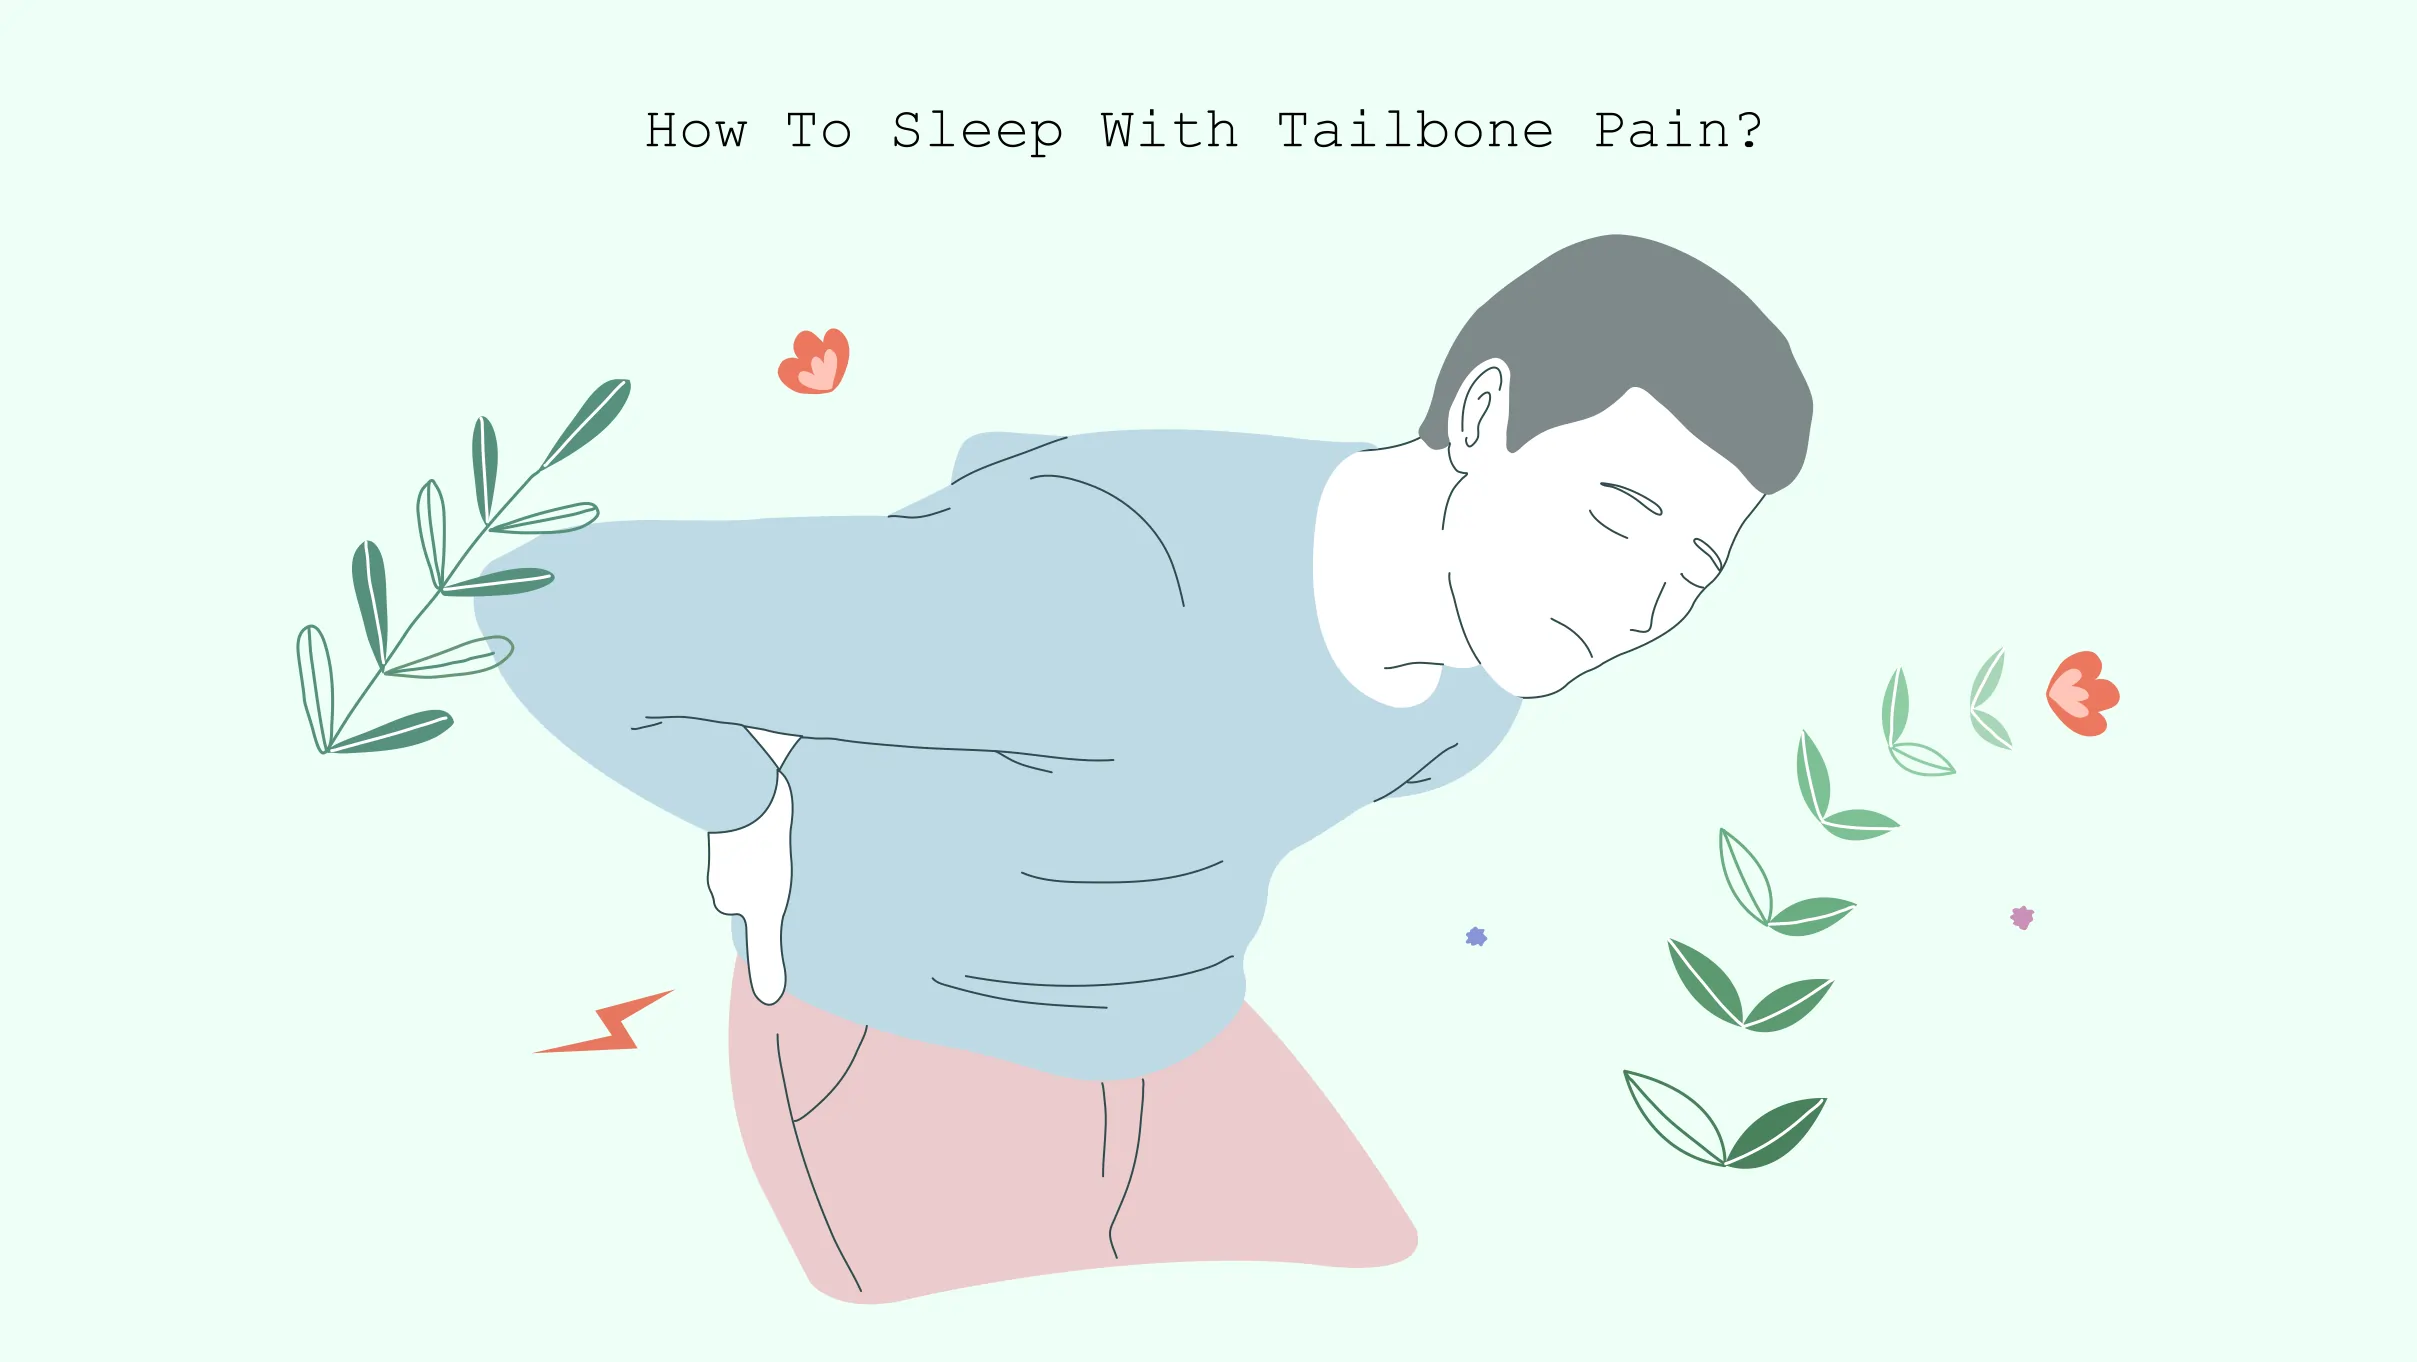 Suffering with coccyx pain? Here's how to get a good night's sleep